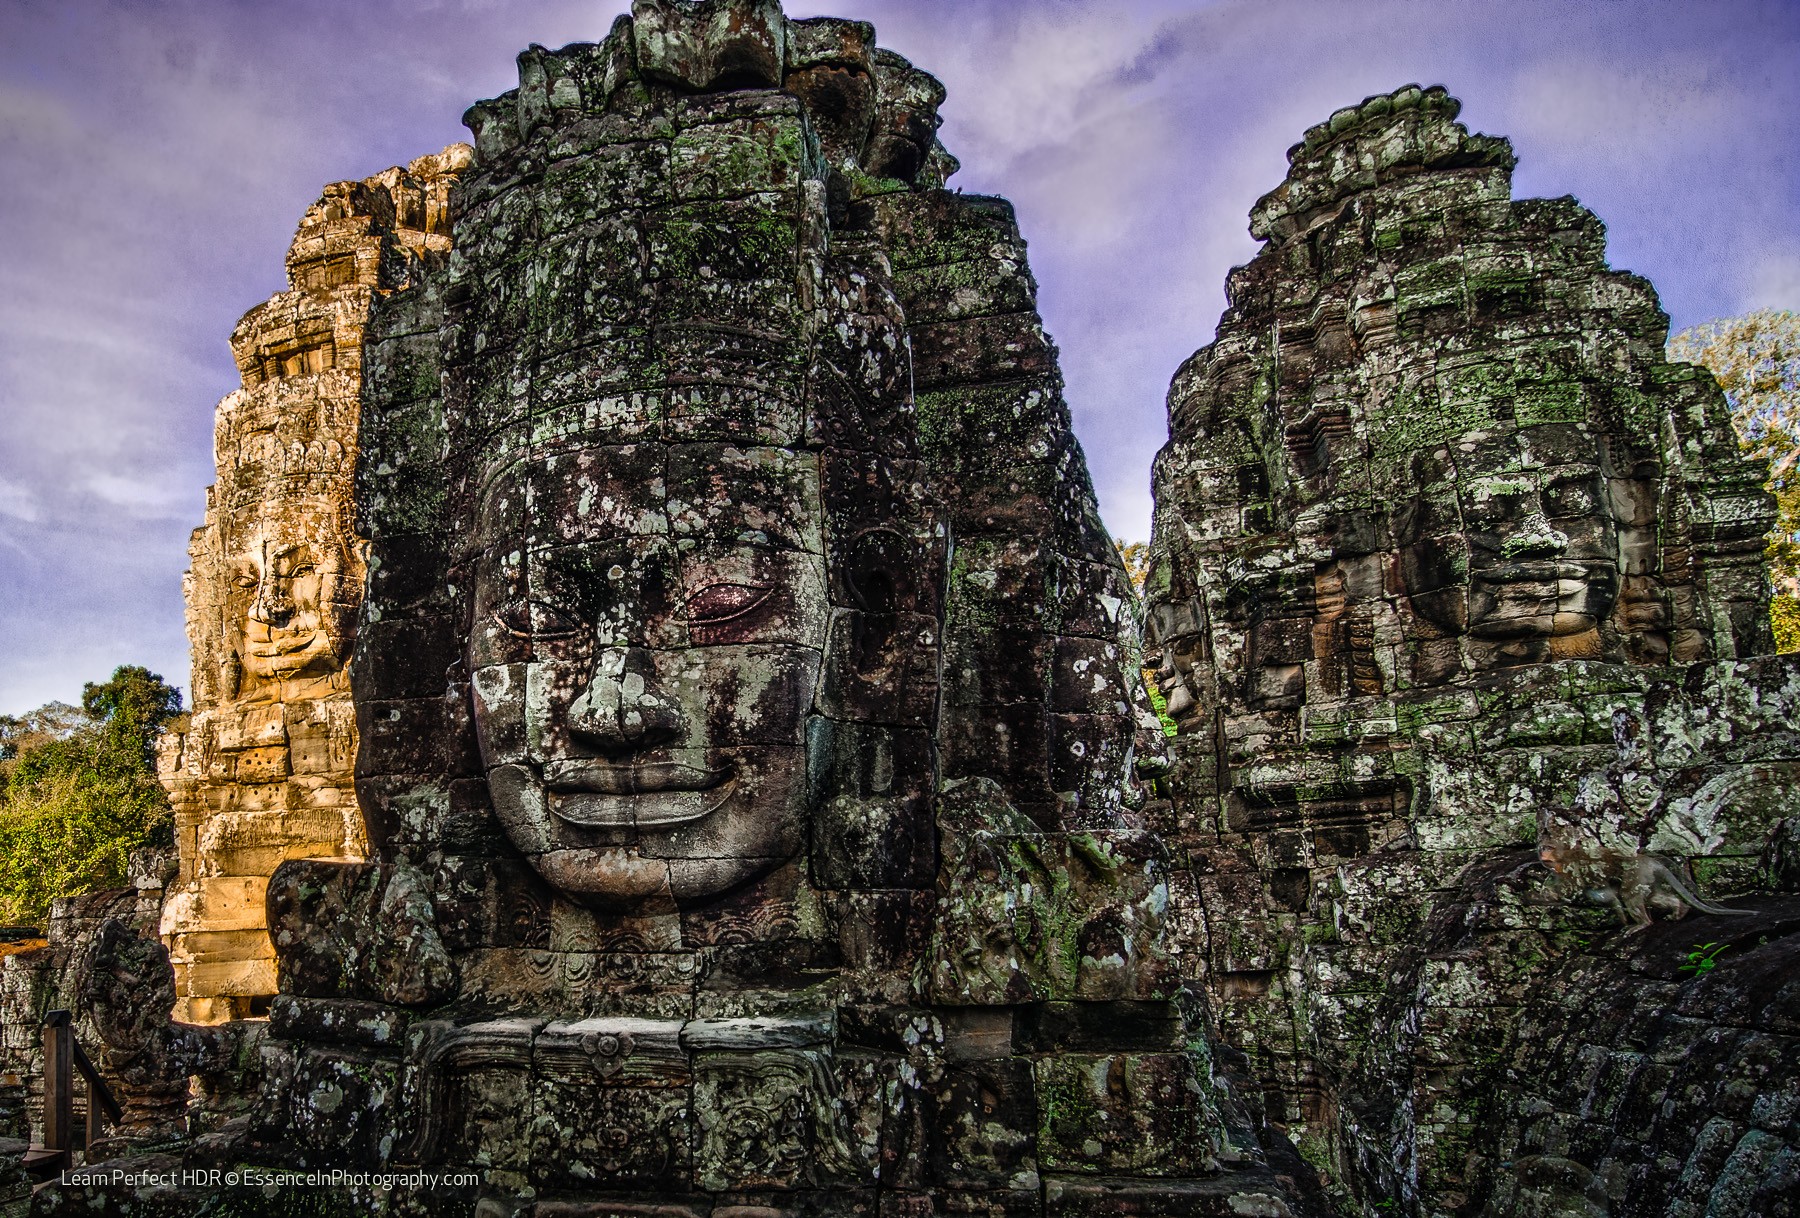 Buddha Face Carvings In Stone At Bayon Temple